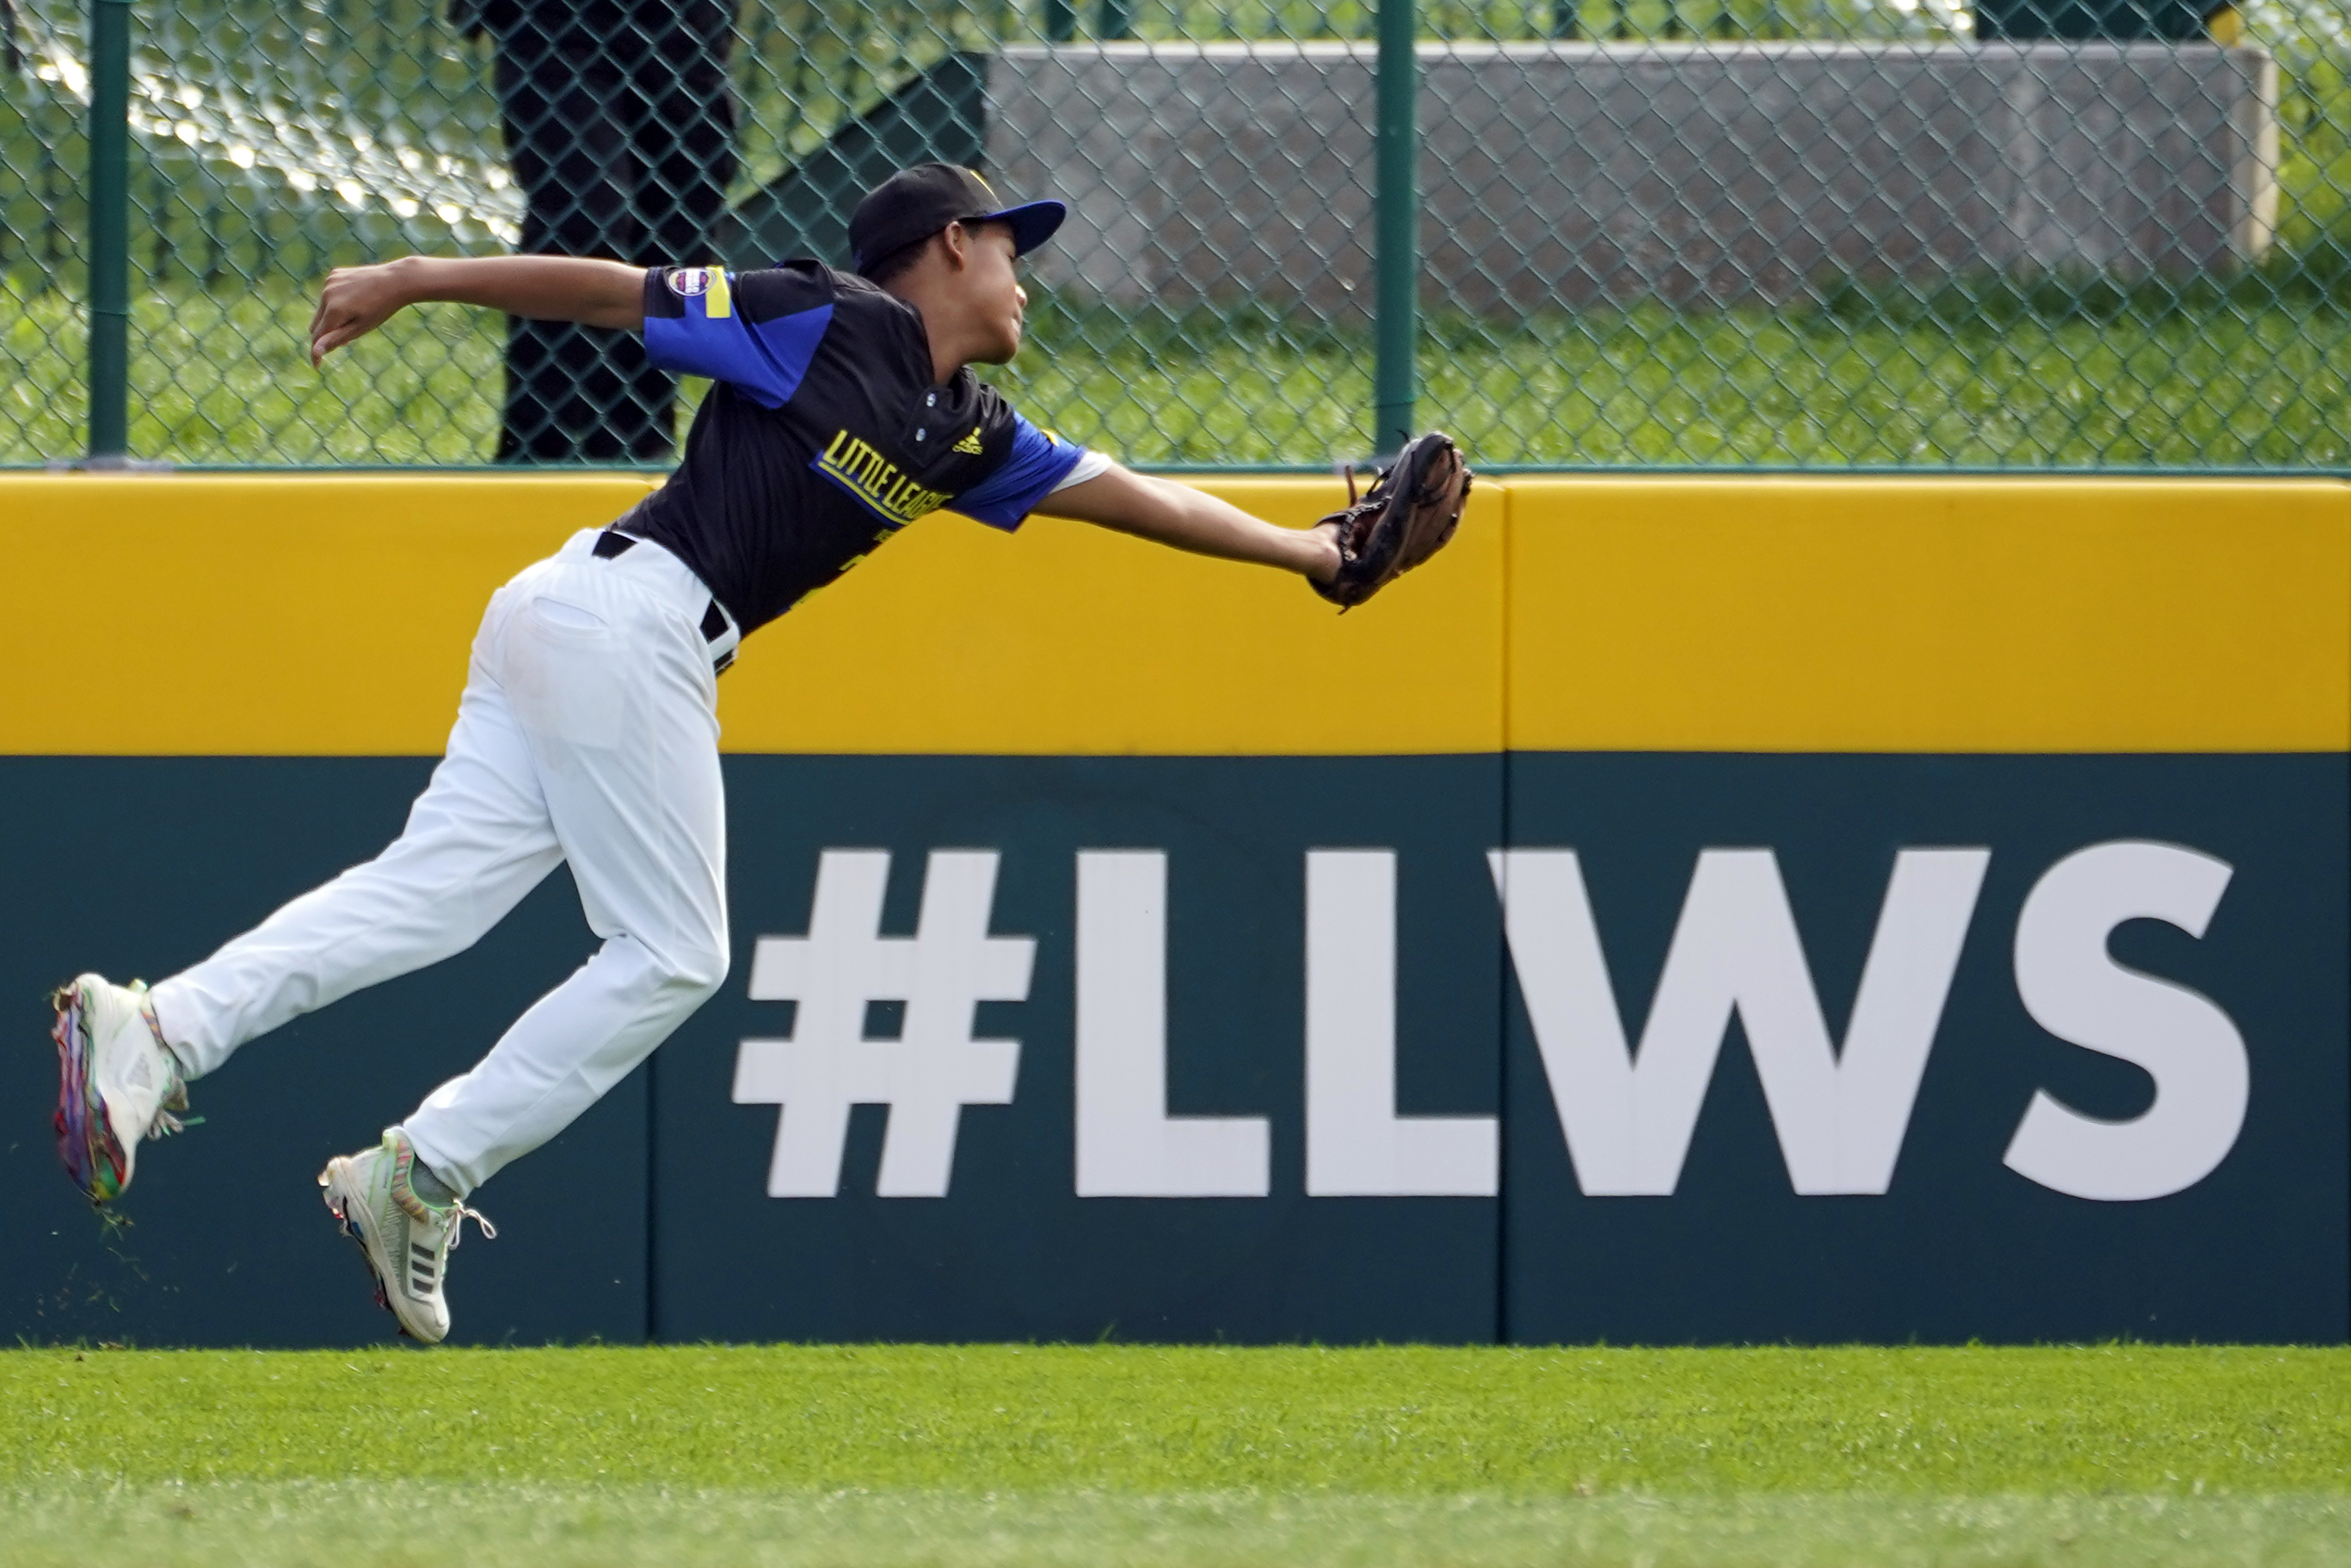 Little League World Series bracket tracker: Updated list of teams to  qualify for 2023 LLWS baseball tournament